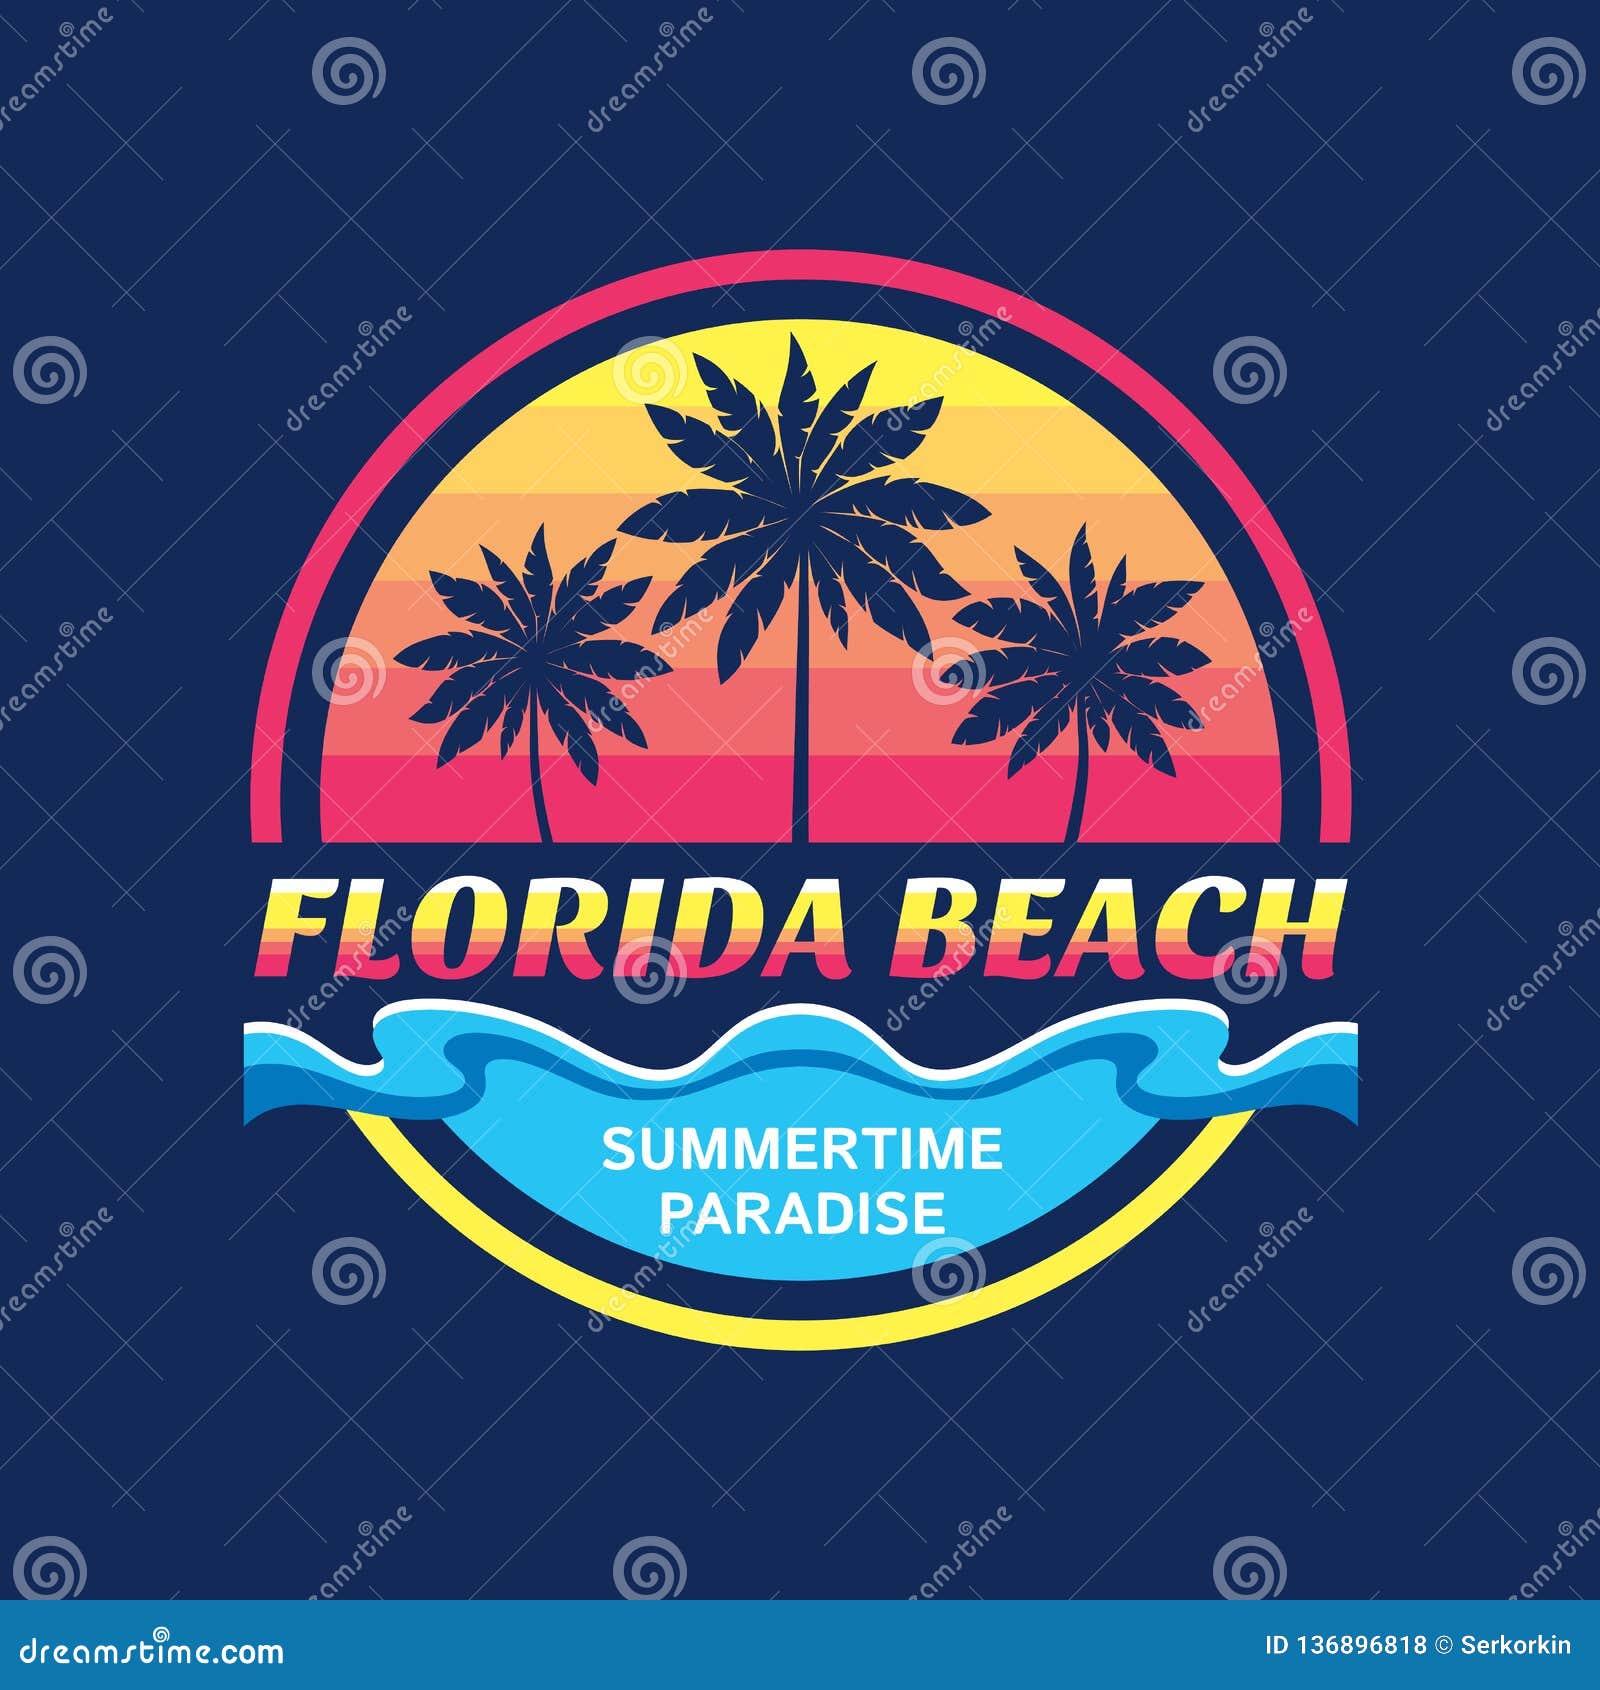 florida beach -   concept in retro vintage graphic style for t-shirt and other print production. palms, sun